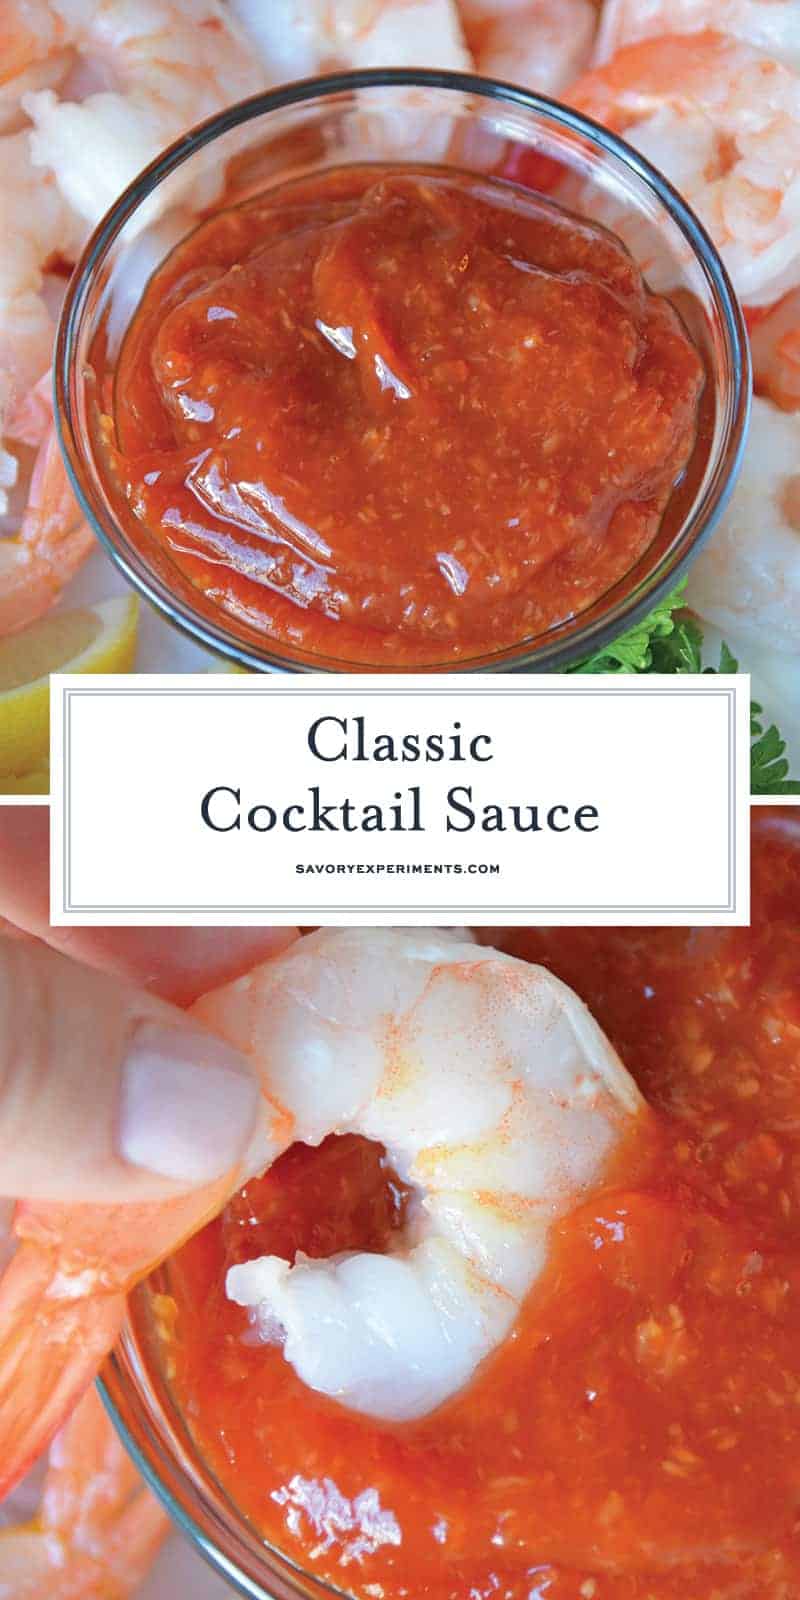 Classic Cocktail Sauce is more than just ketchup and horseradish. Come see how to make a spectacular, restaurant quality sauce in just 5 minutes! #cocktailsauce www.savoryexperiments.com